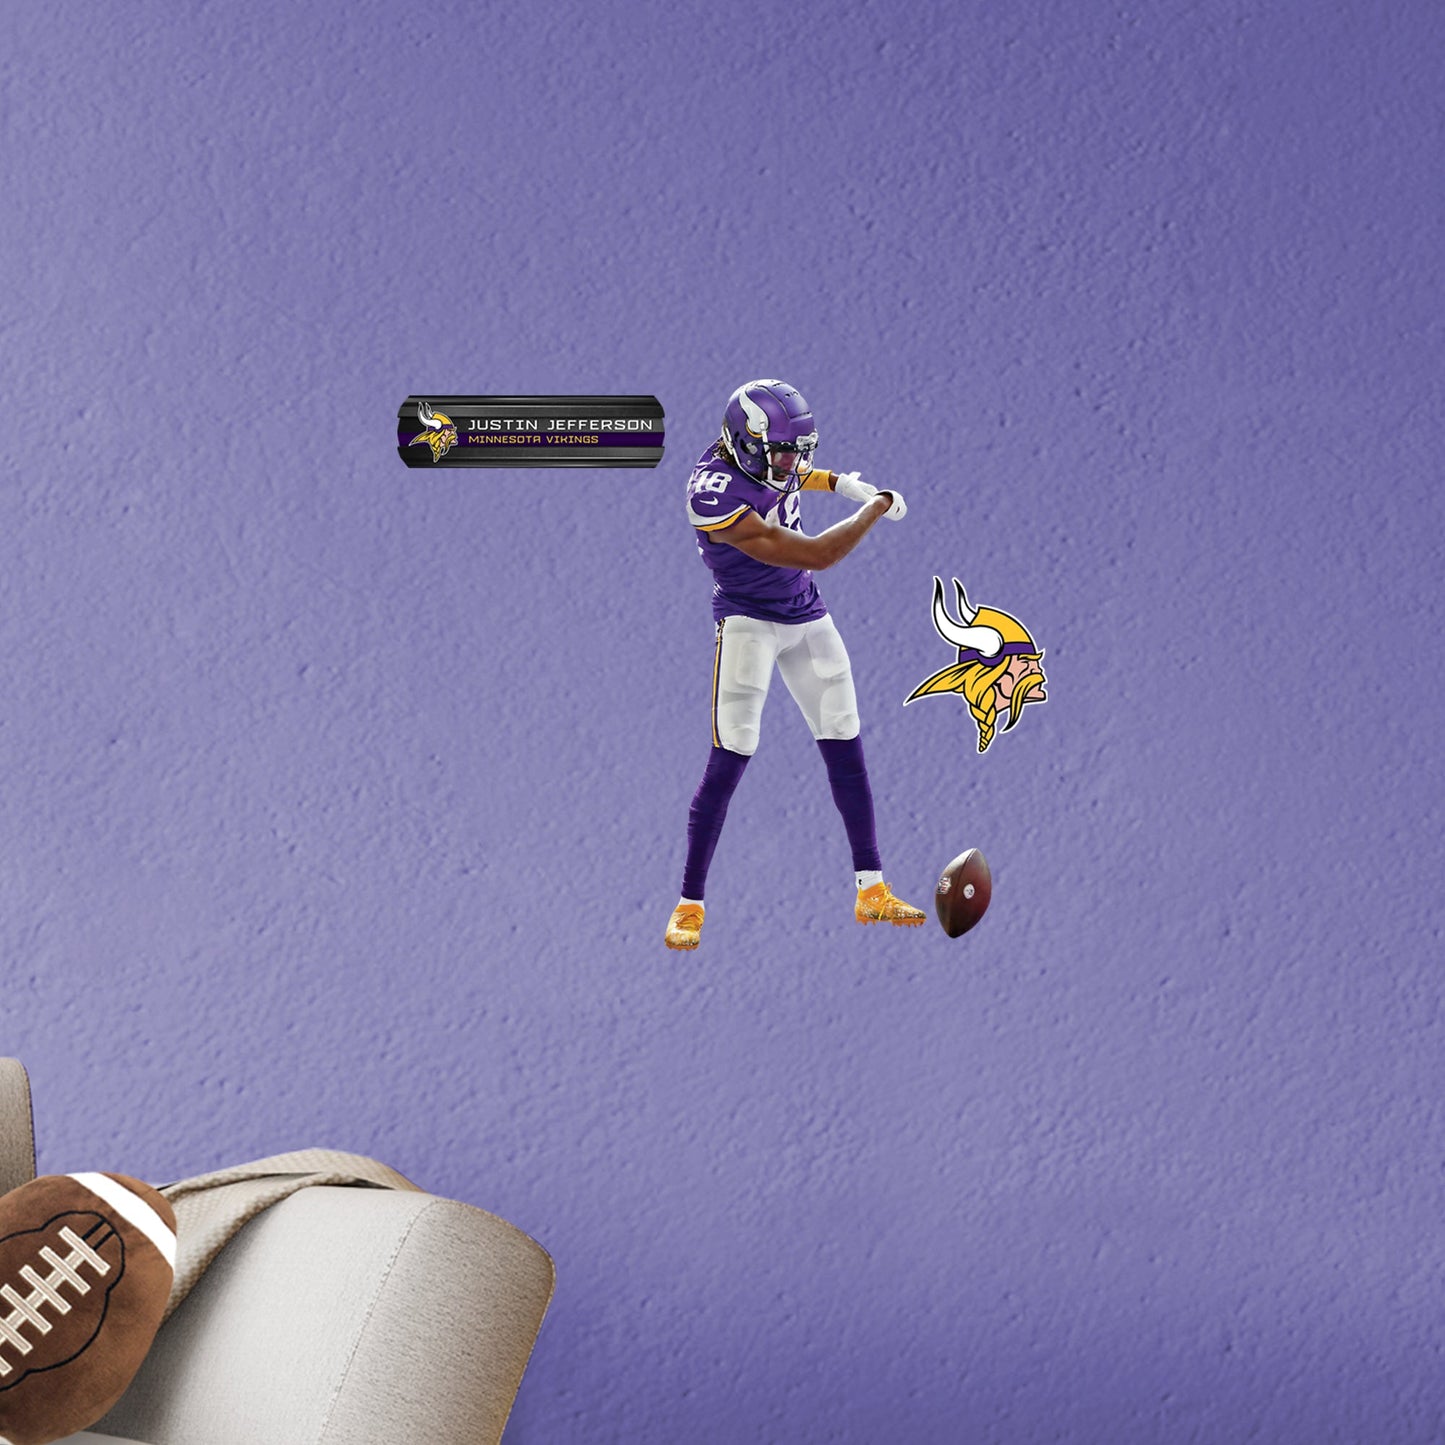 Minnesota Vikings: Justin Jefferson Ball Spin - Officially Licensed NFL Removable Adhesive Decal